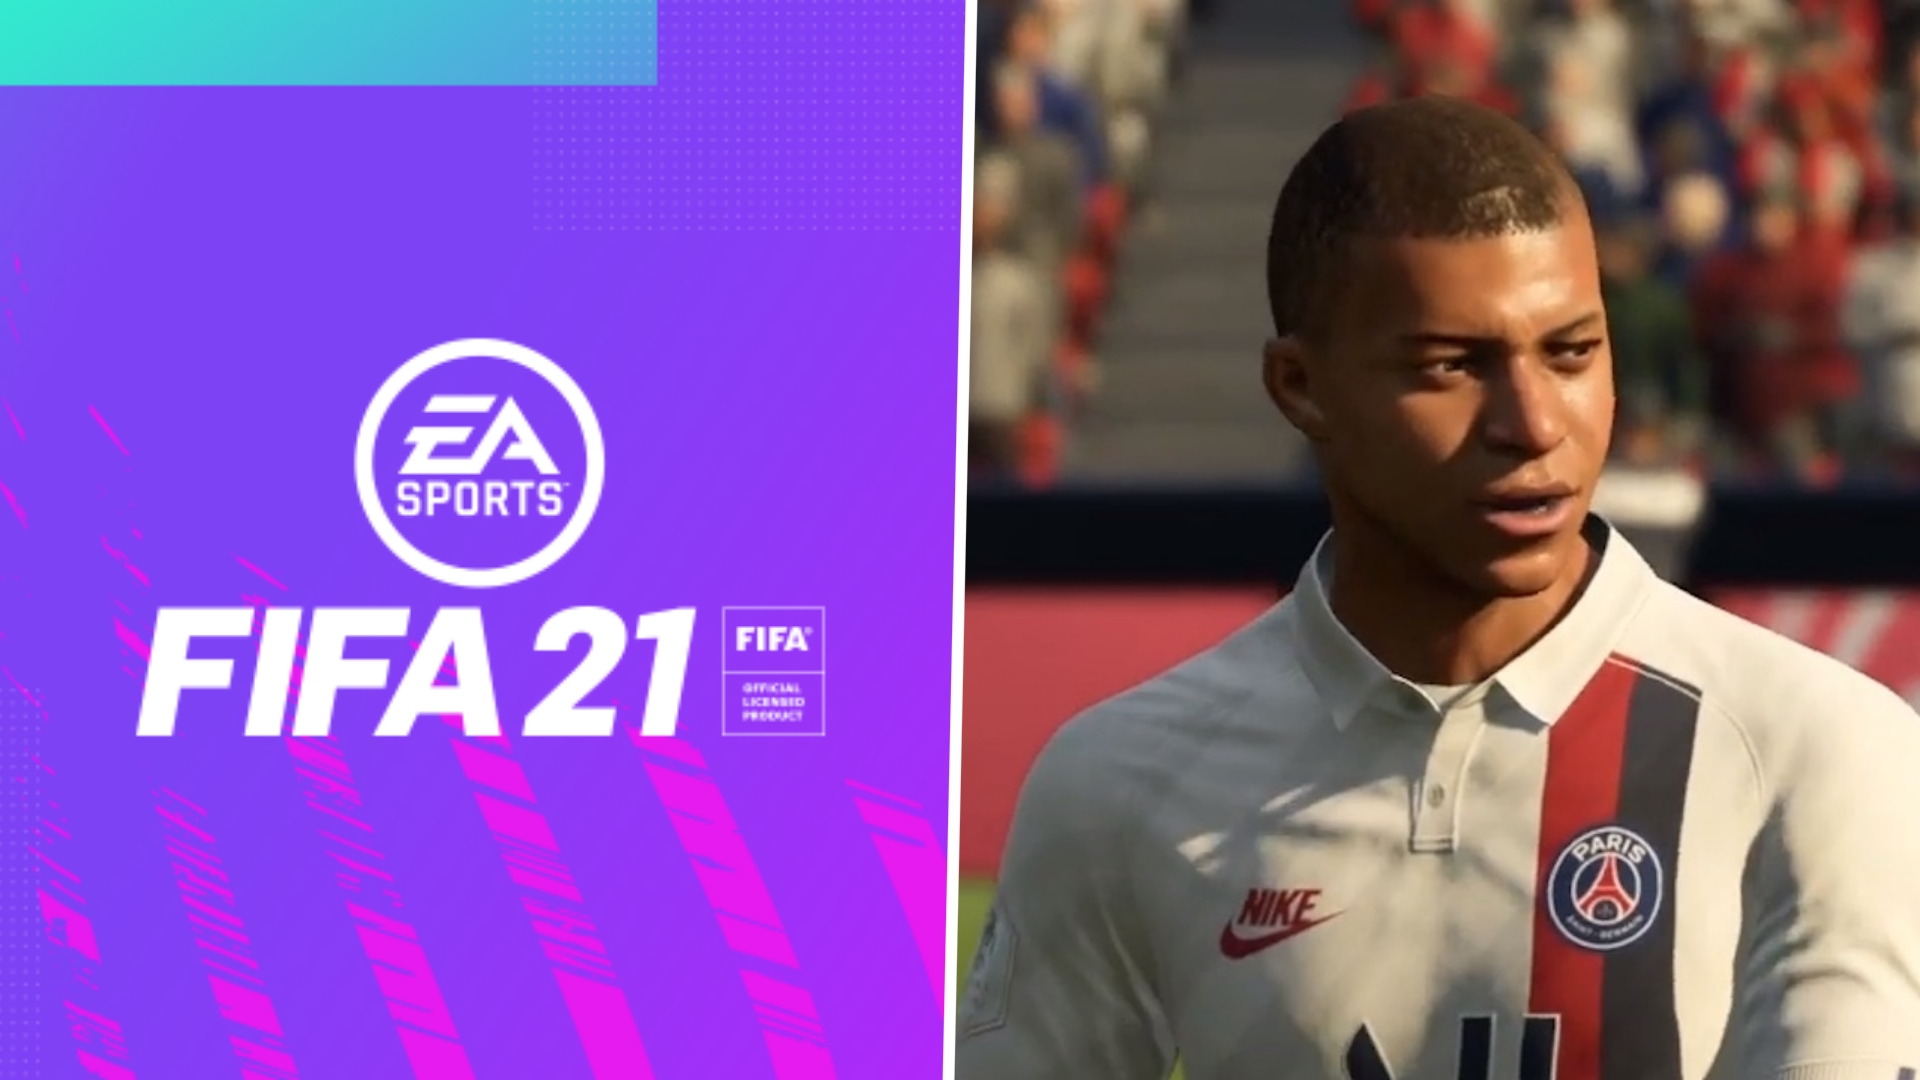 FIFA 21 Ultimate Edition: Price difference, features & comparison